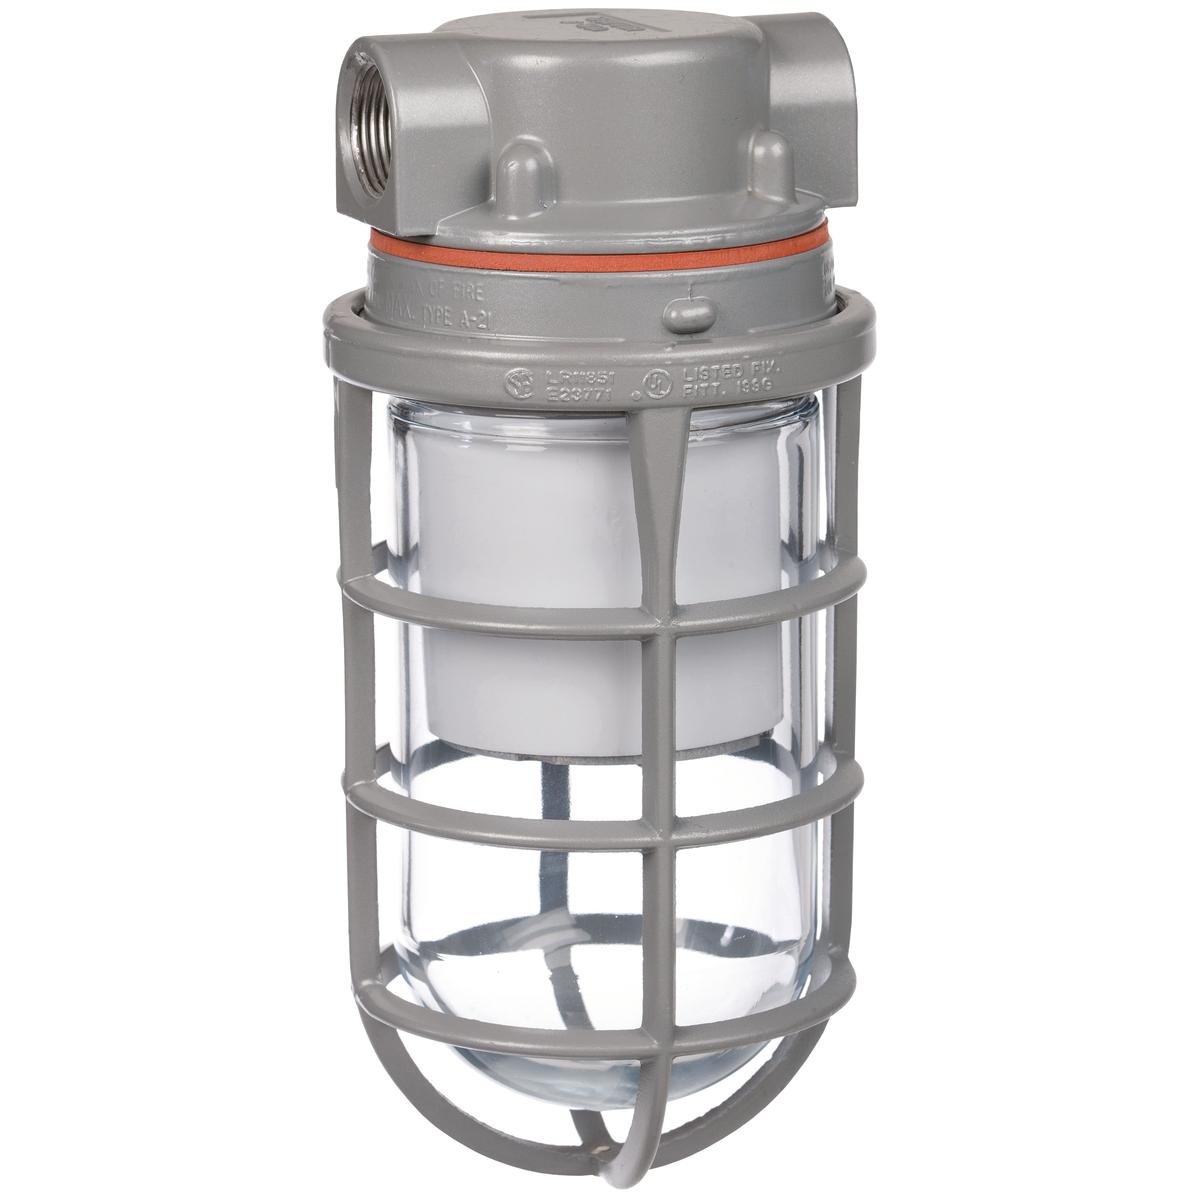 Hubbell VSL1330C1HG The VSL Series is a Vapor Tight/ Utility fixture using energy efficient LED's. This fixture is made with a cast copper-free aluminum housing and mount that is  suitable for harsh and hazardous environments. With the design of this fixtures internal heat s